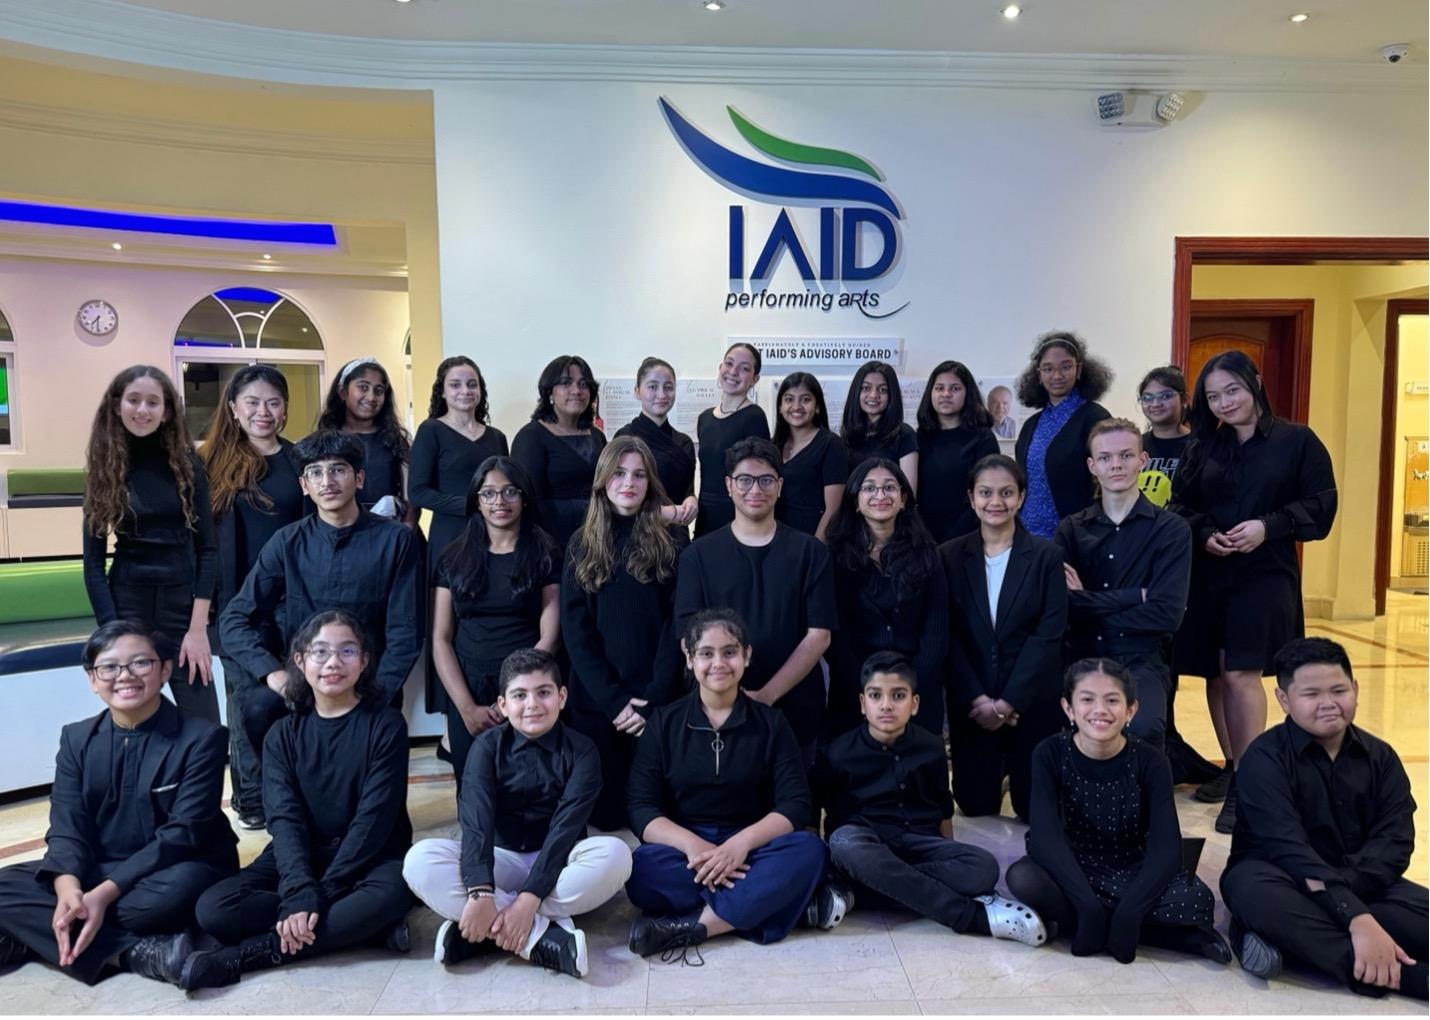 IAID Performing Arts to represent Qatar at the International Folklore Festival in Tbilisi, Georgia